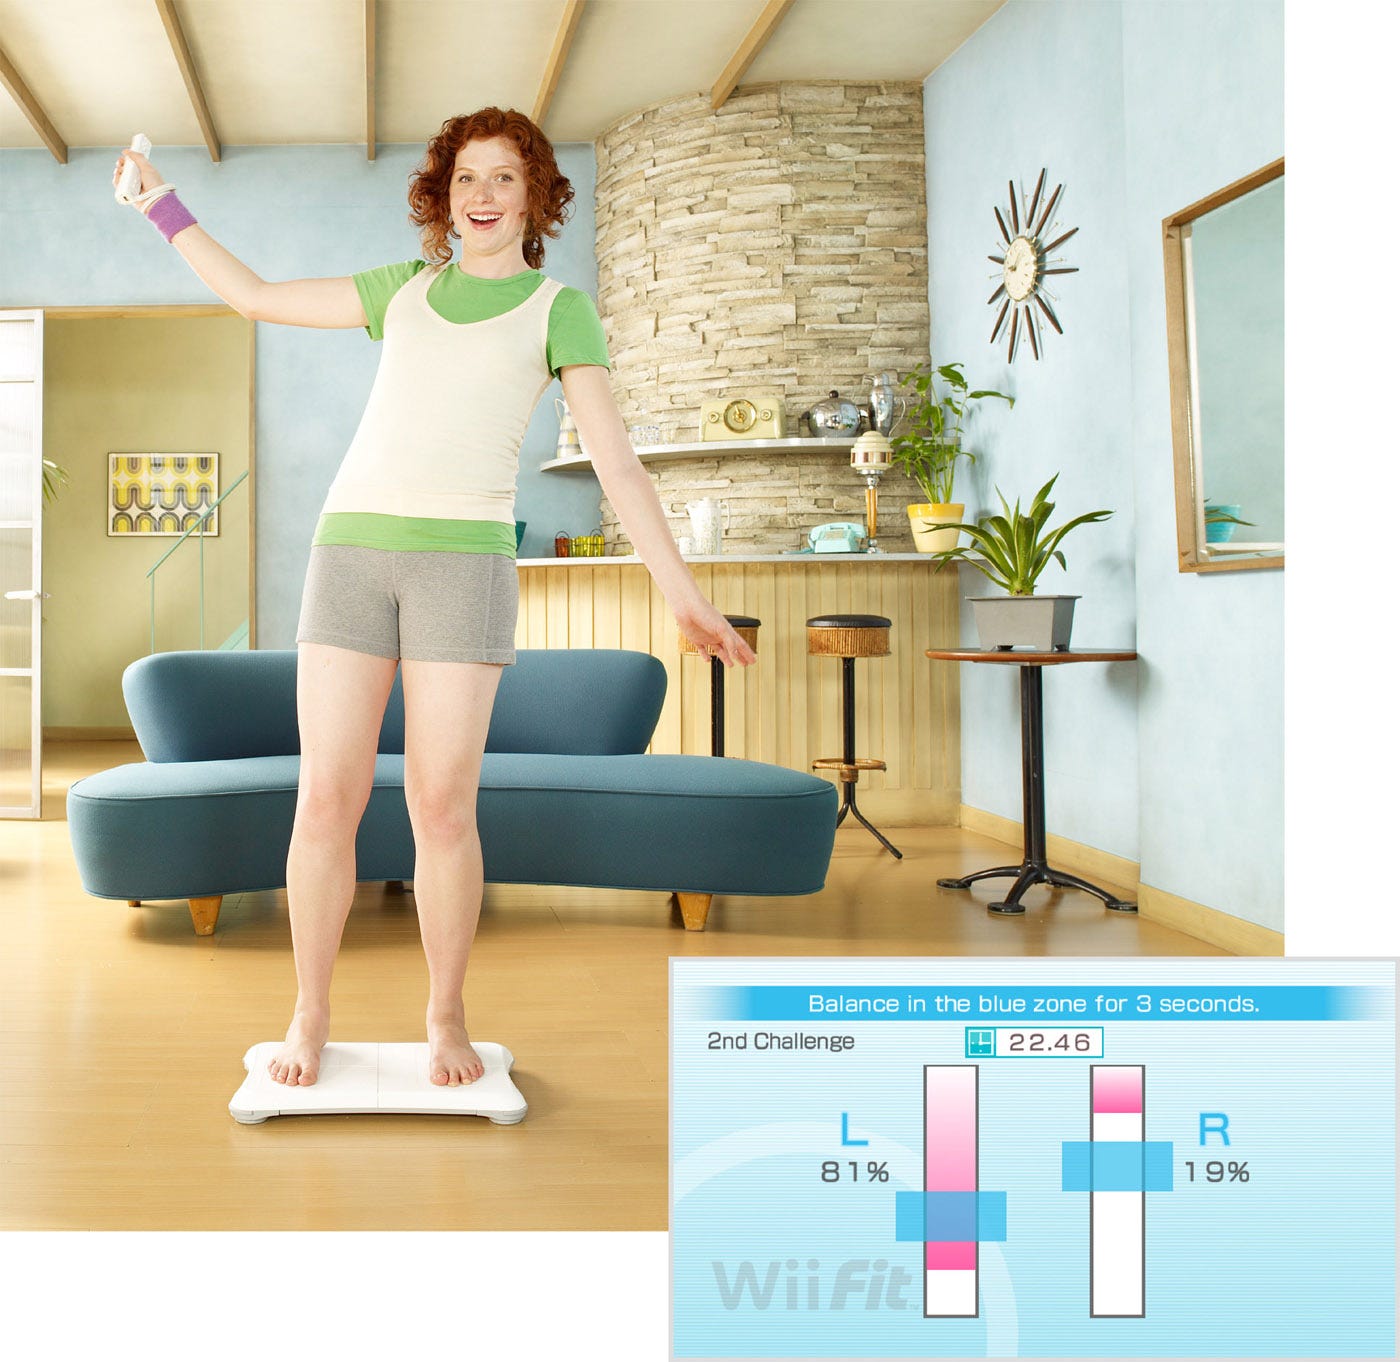 Remembering Wii Fit. The pandemic has created a dearth of… | by Shawn Laib  | SUPERJUMP | Medium